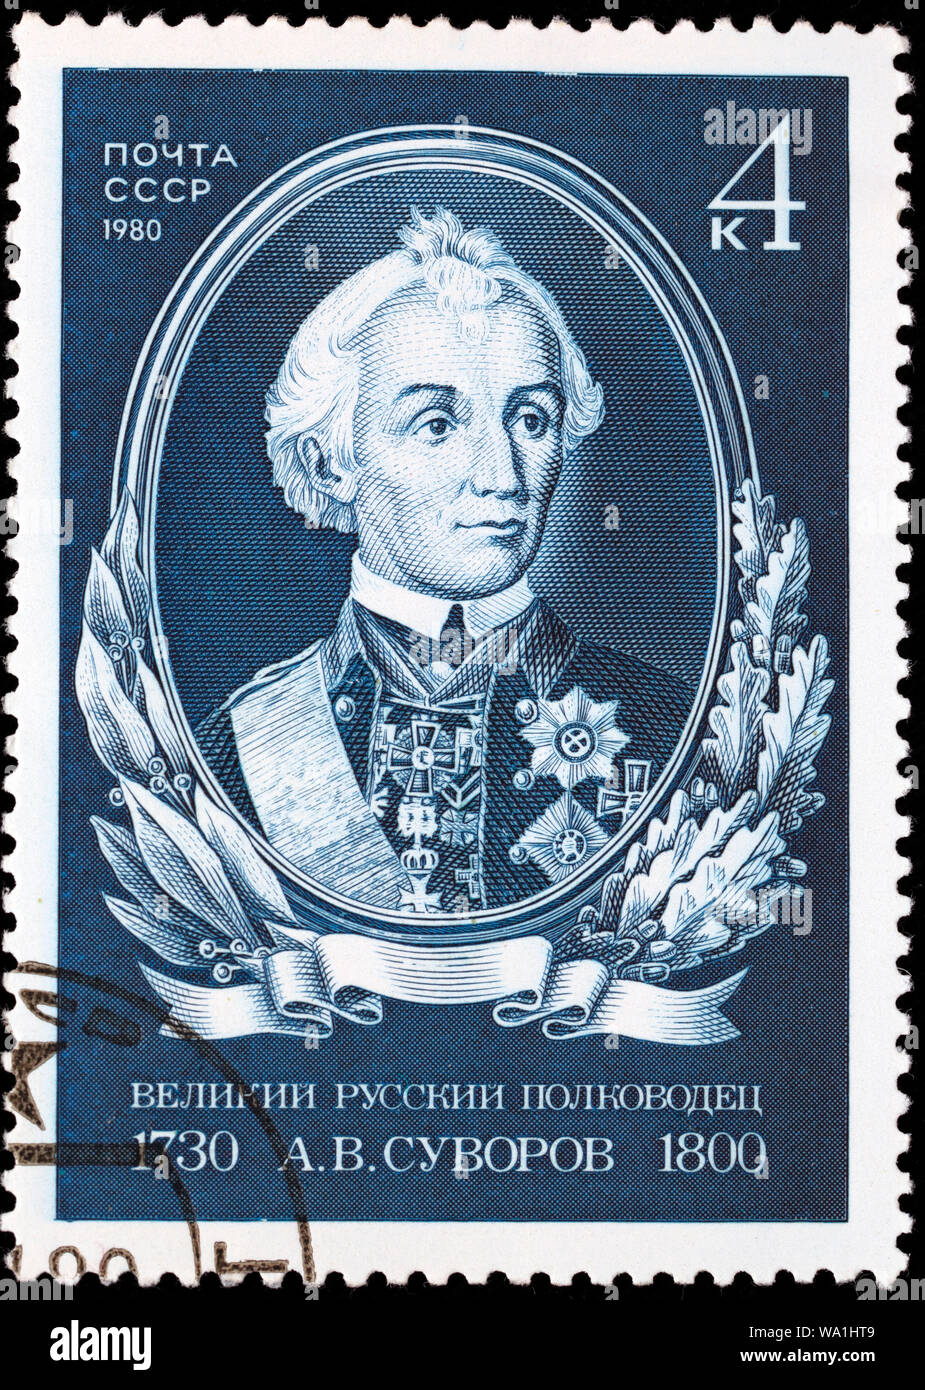 Alexander Suvorov (1730-1800), Russian Generalissimo, postage stamp, Russia, USSR, 1980 Stock Photo